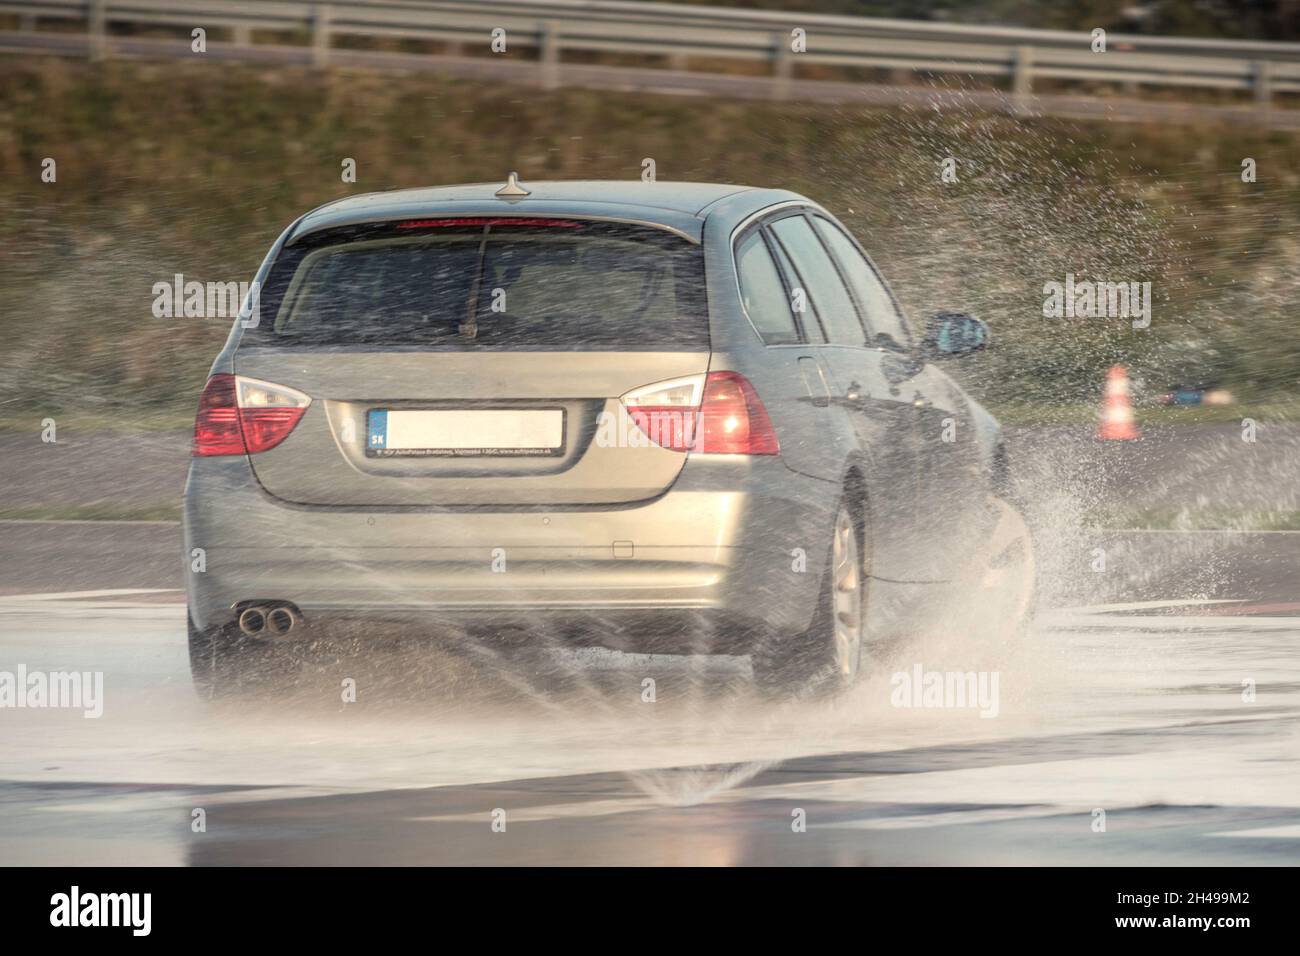 Car sliding on a wet professional training ground during a safe driving course Stock Photo